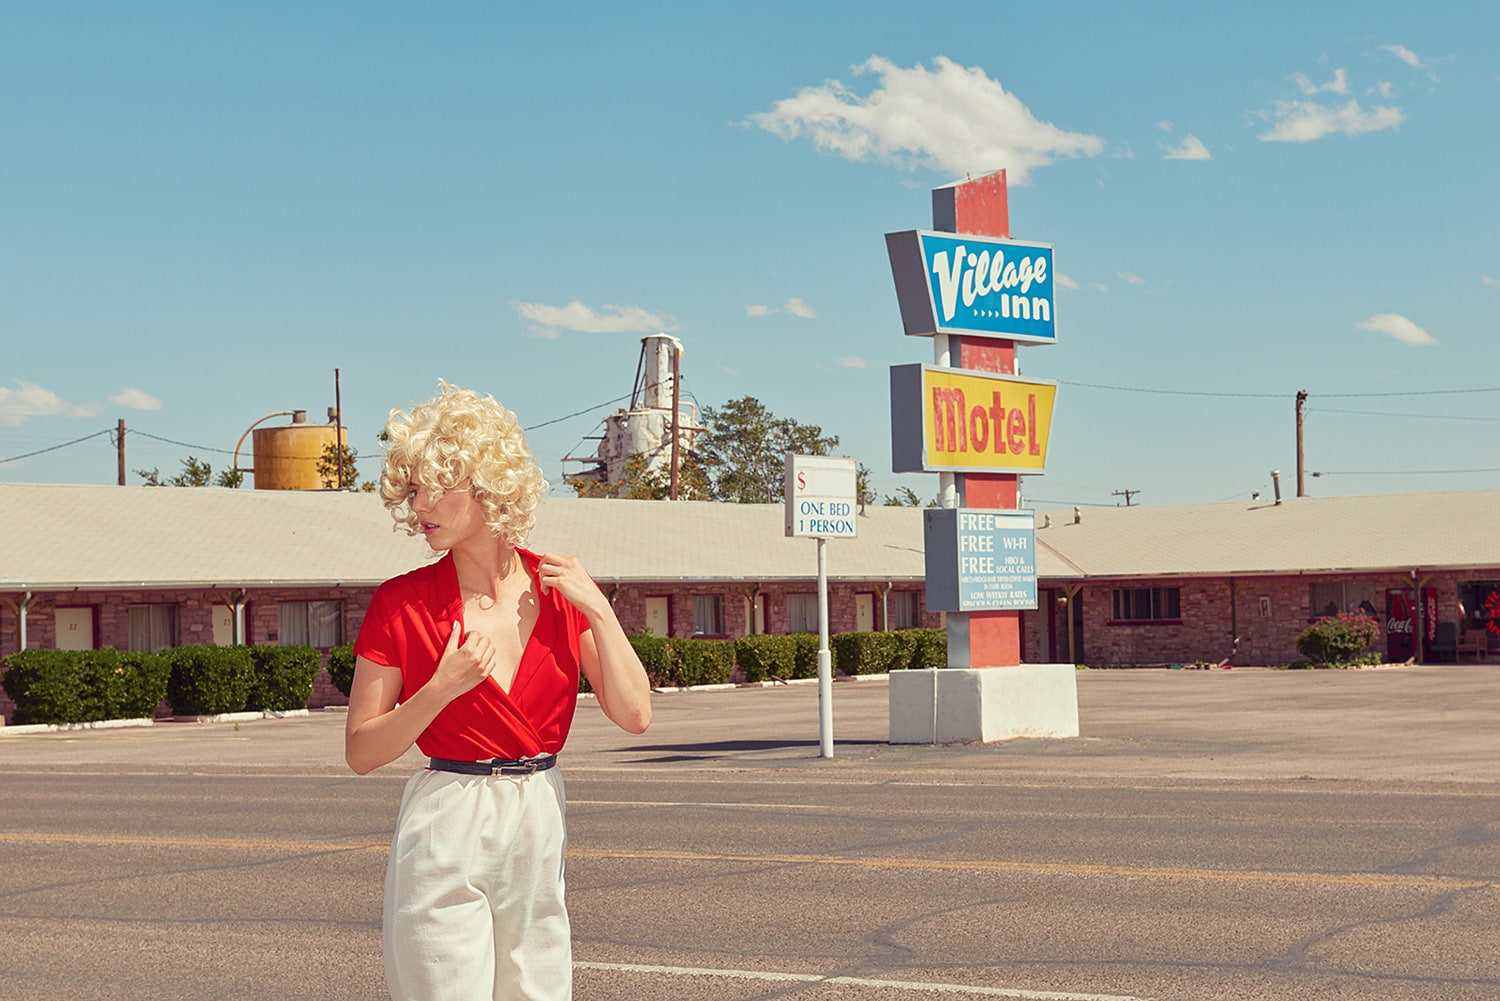 Untitled 18, From the Series 'Sorry No Vacancy', 2016, Kourtney Roy